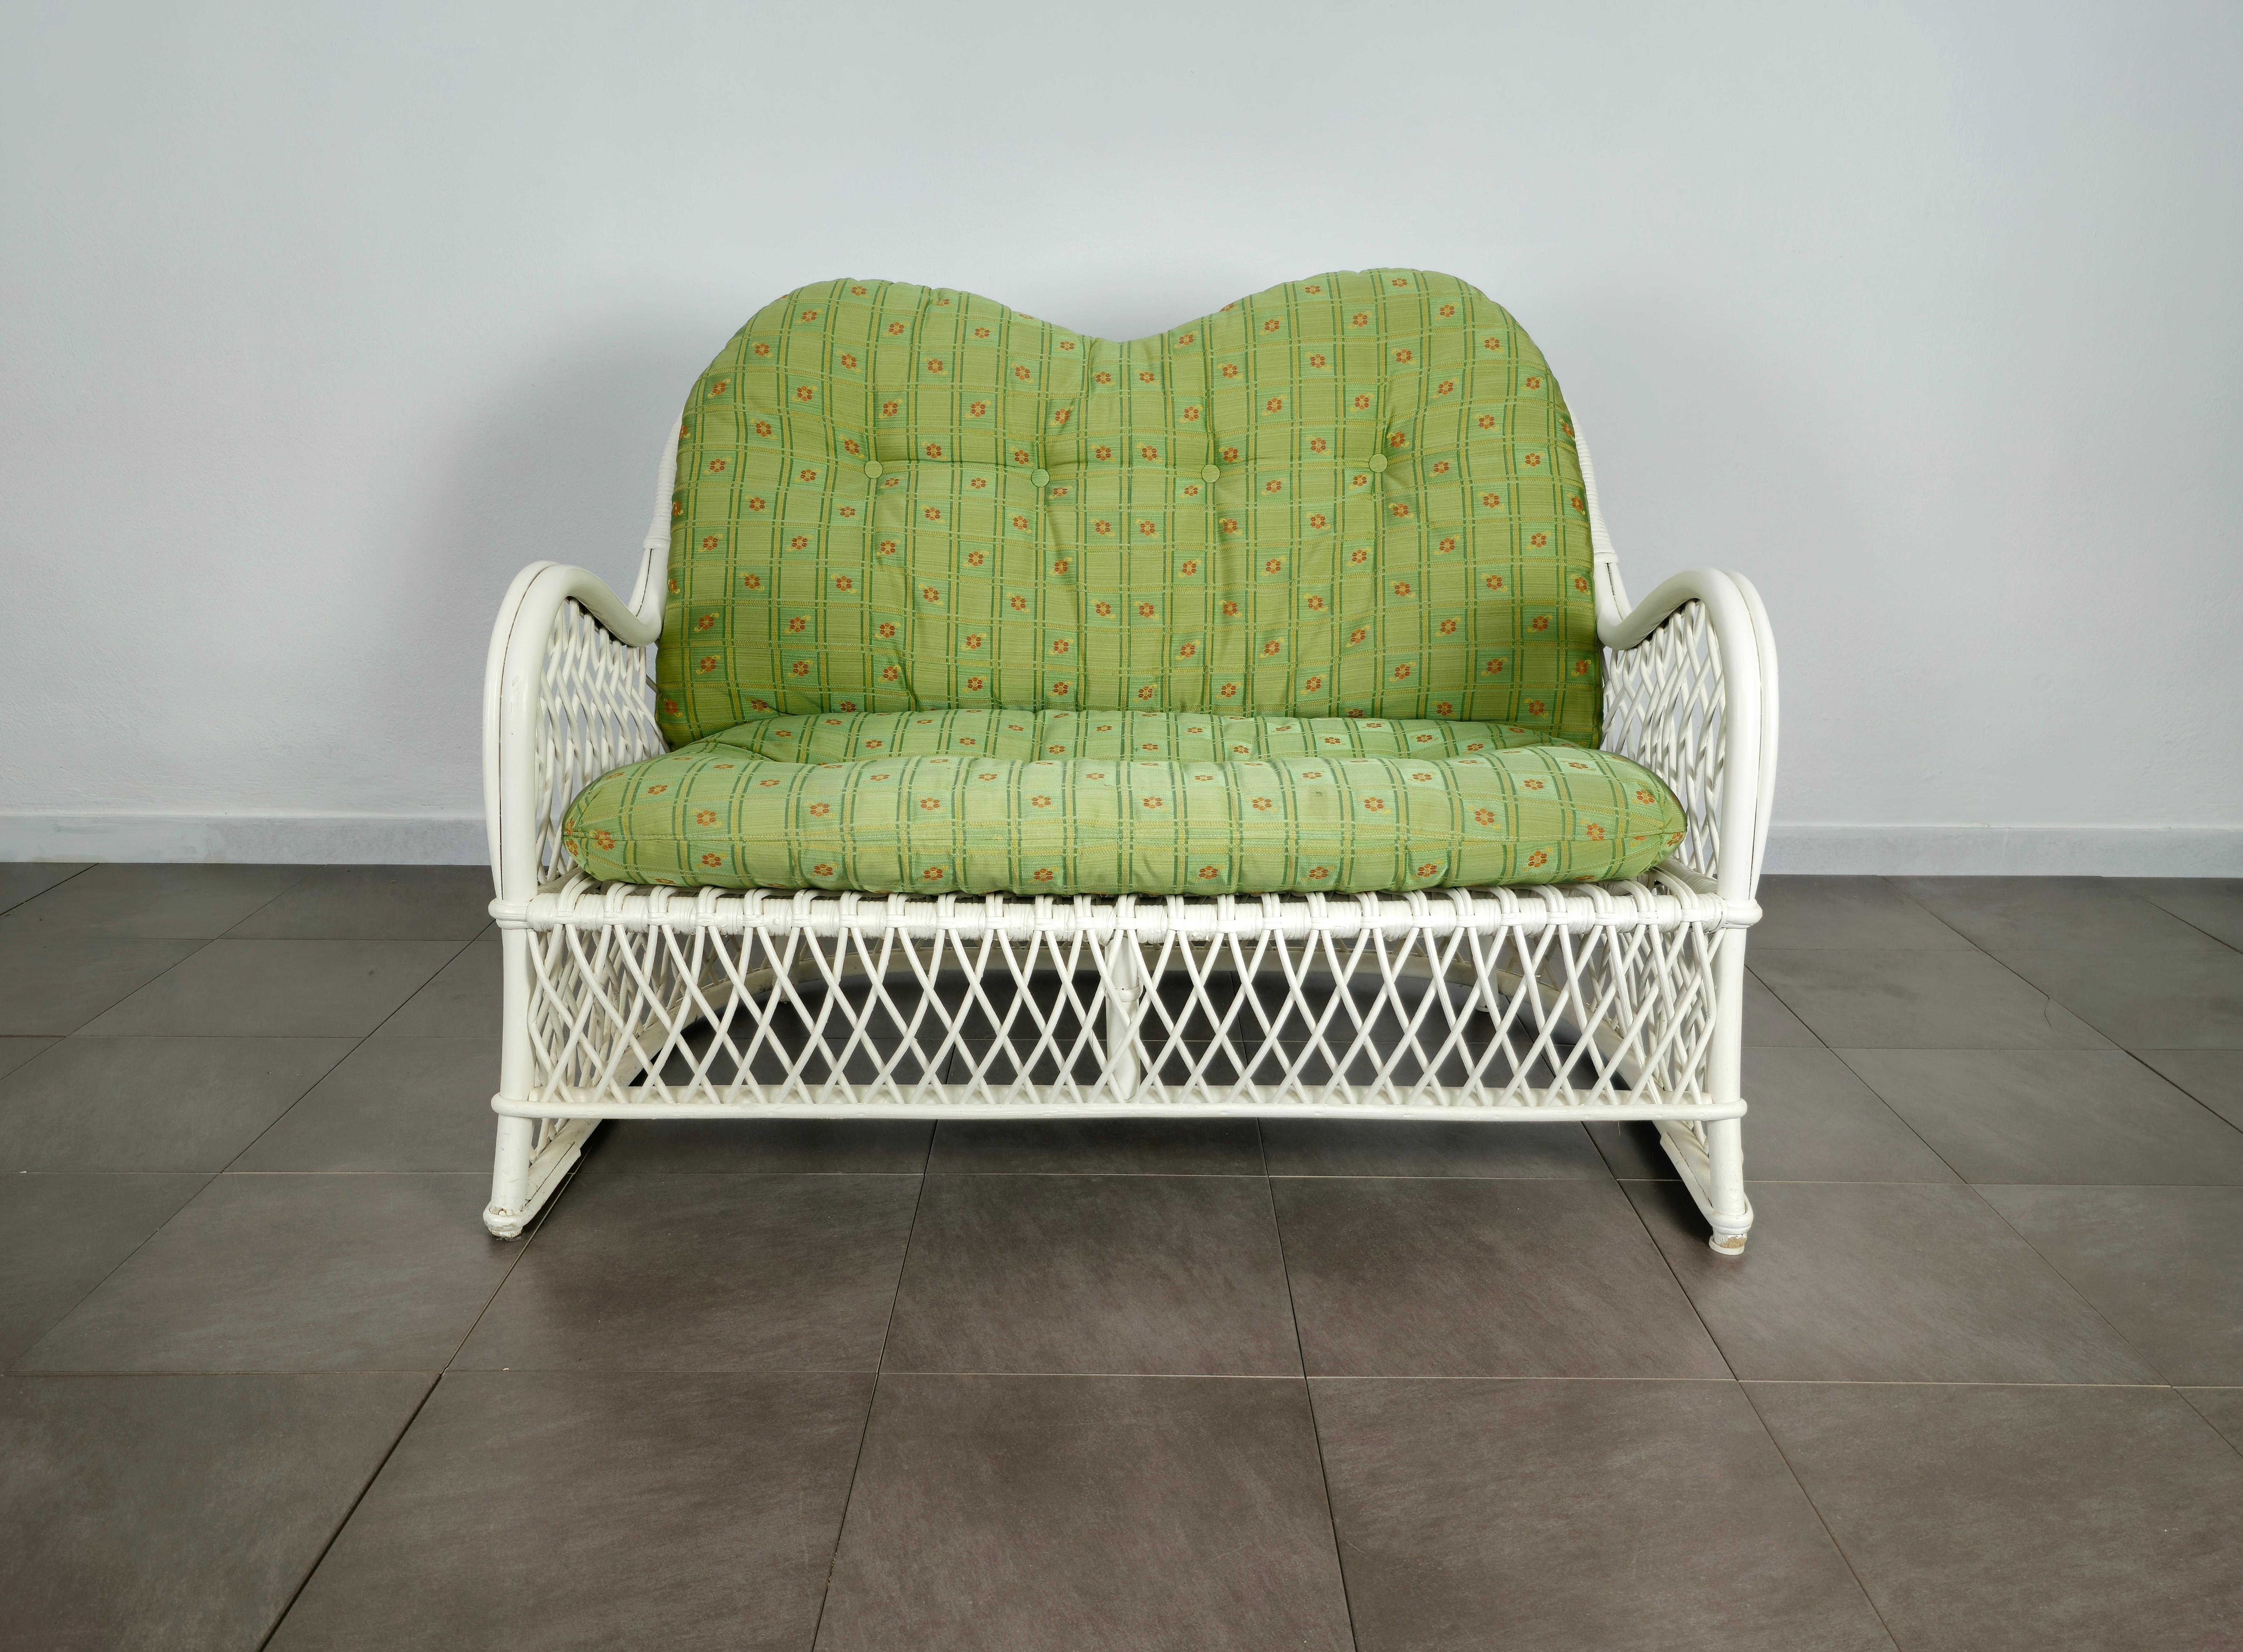 Sofa Bamboo Rattan Green Fabric Attributed to Vivai del Sud Midcentury, 1970s For Sale 2